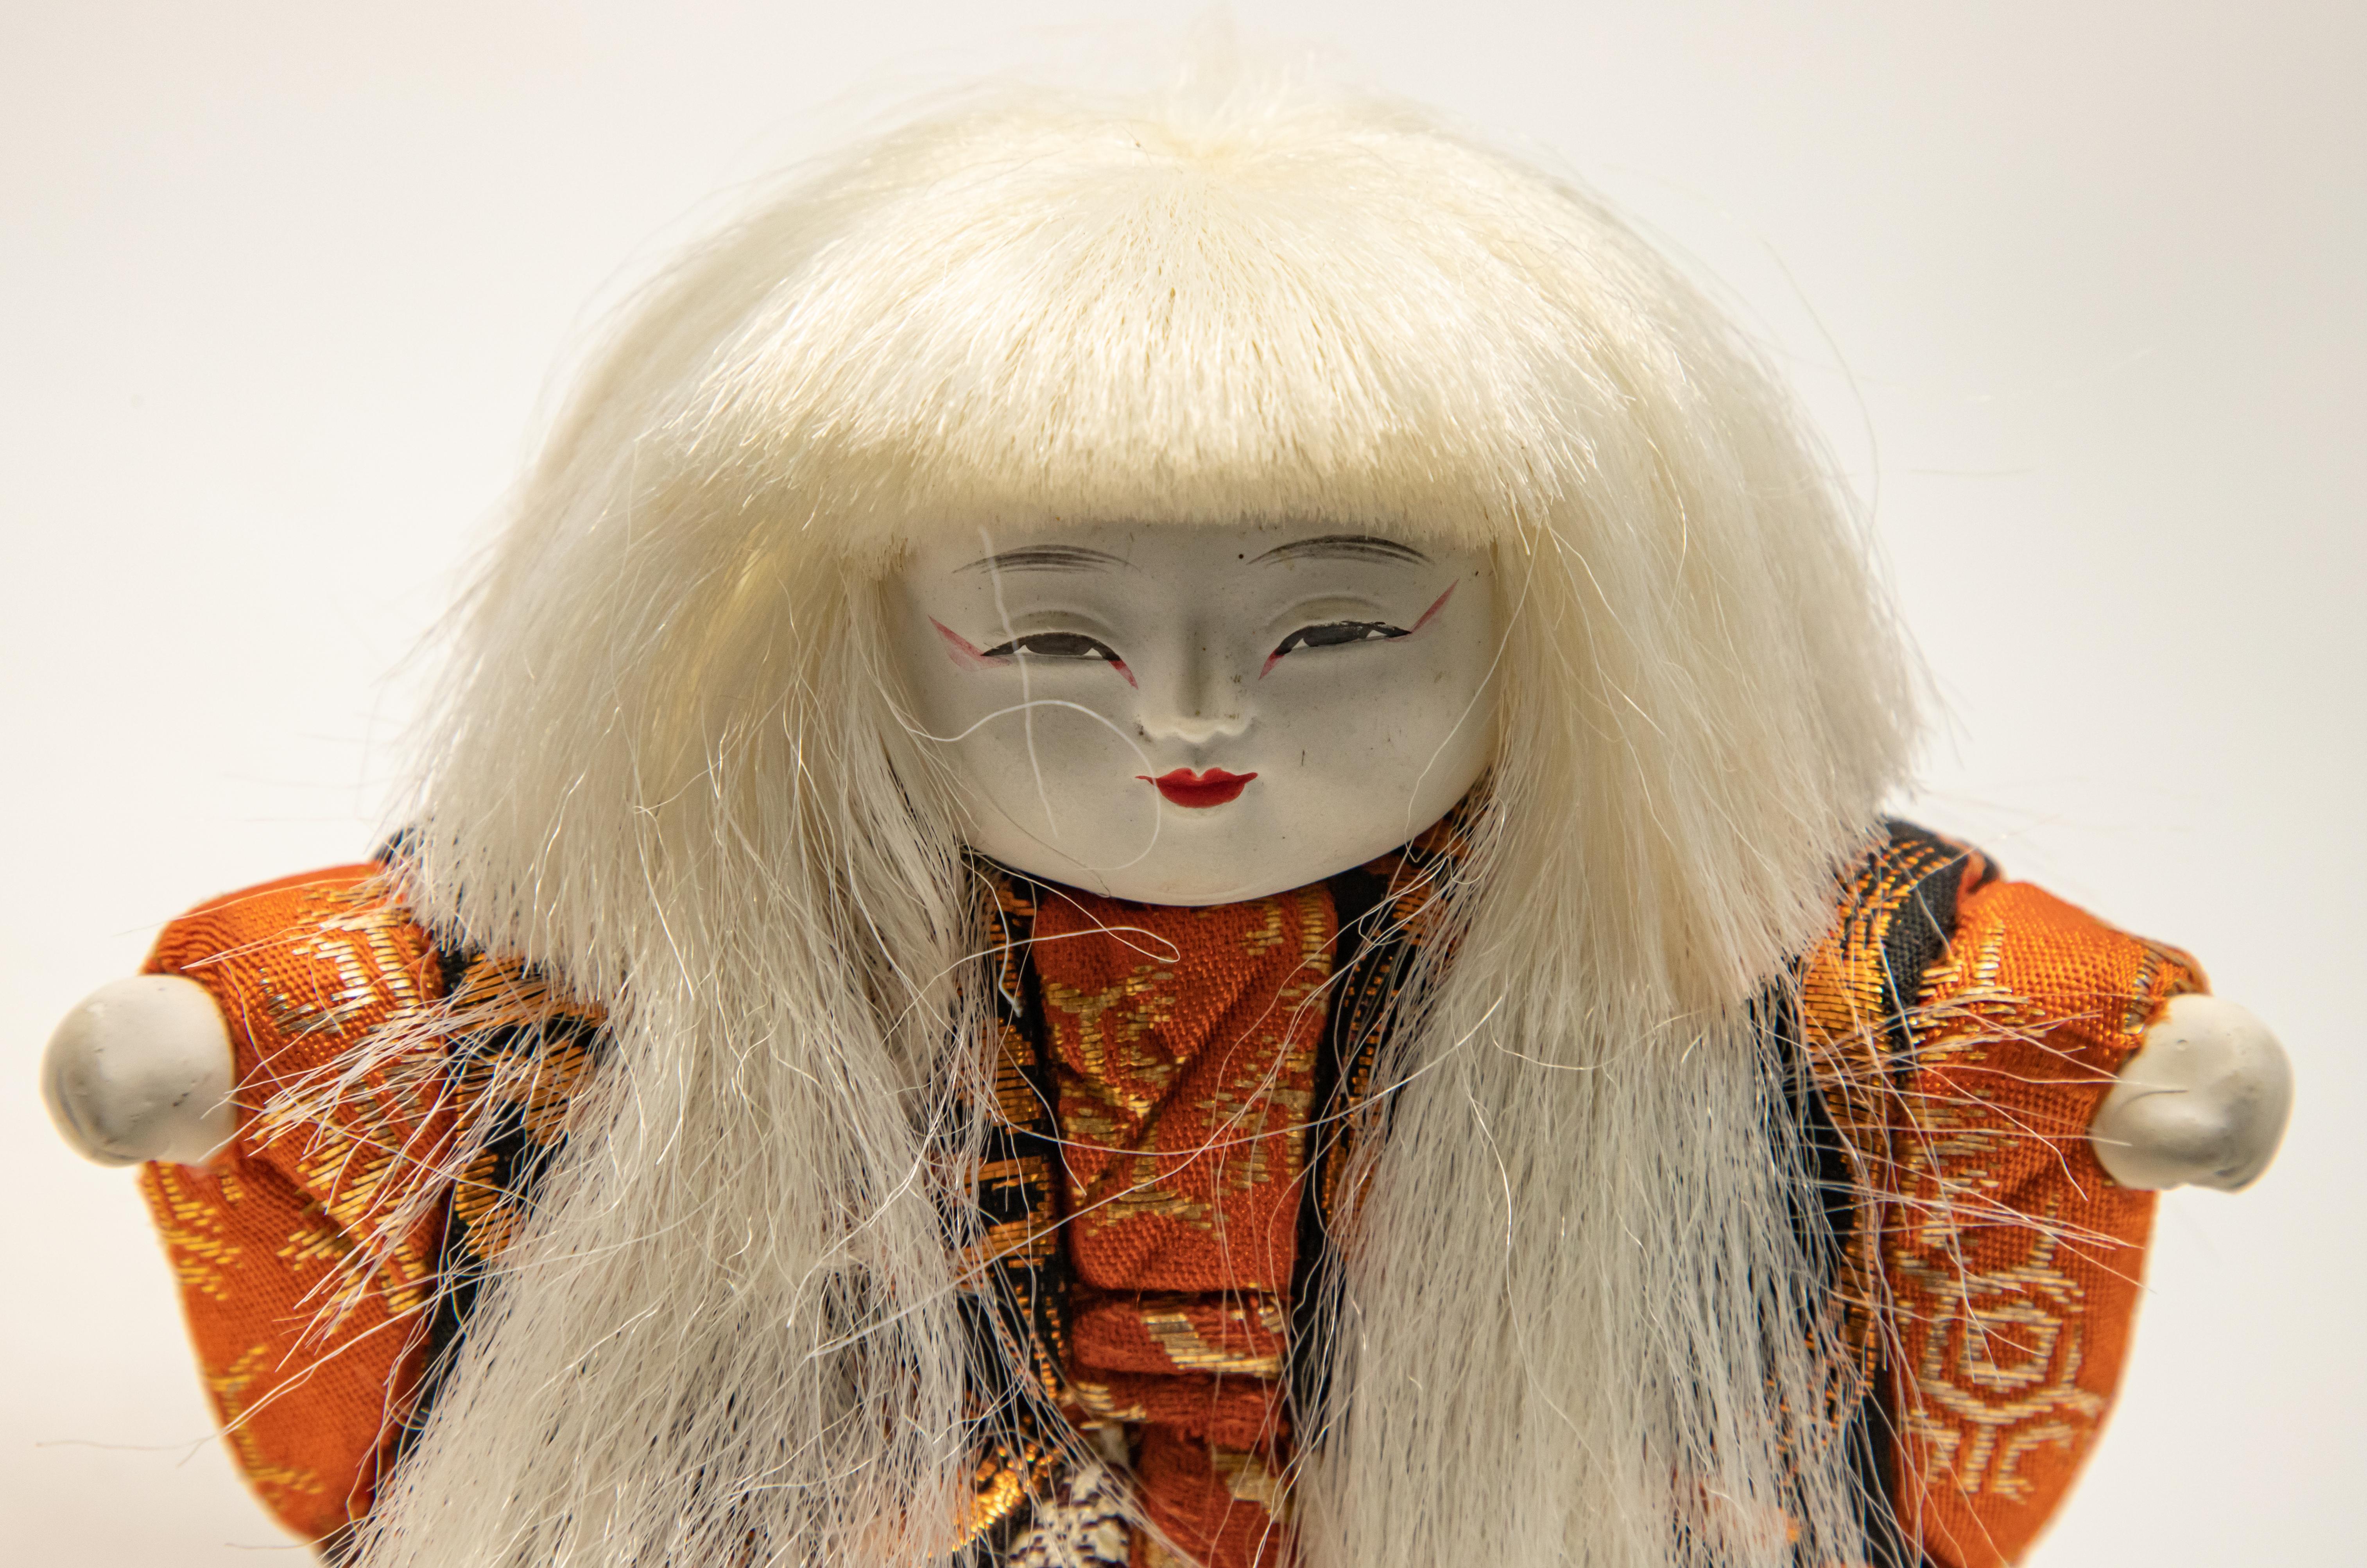 Offering this stunning Japanese Kabuki doll. Made of simple lines with gorgeous textiles chosen for the outfit. The face is airbrushed and hand painted. The hair is synthetic and blond.